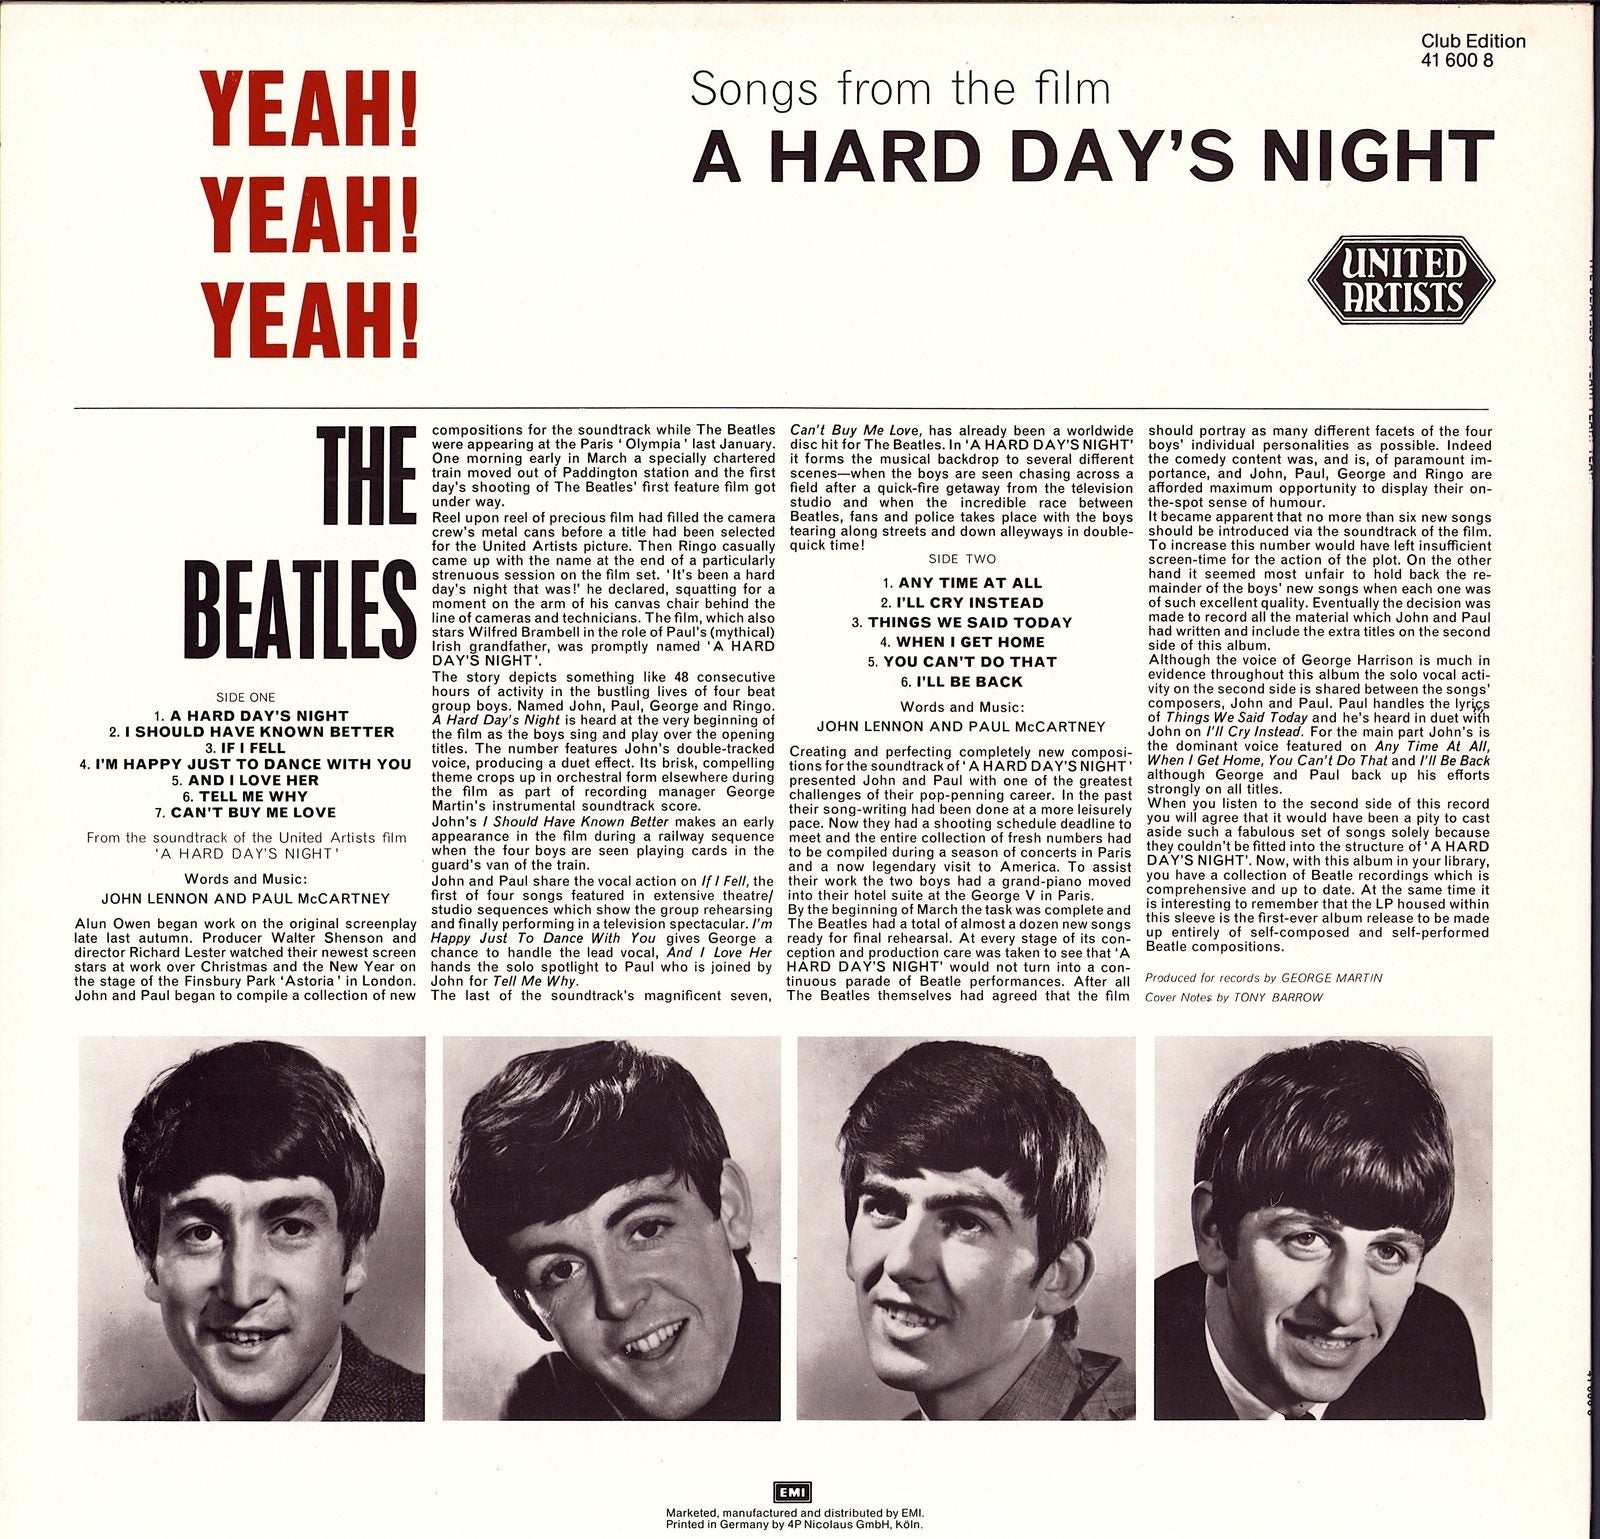 The Beatles ‎- Yeah! Yeah! Yeah! A Hard Day's Night Originals From The United Artists' Picture Club Edition